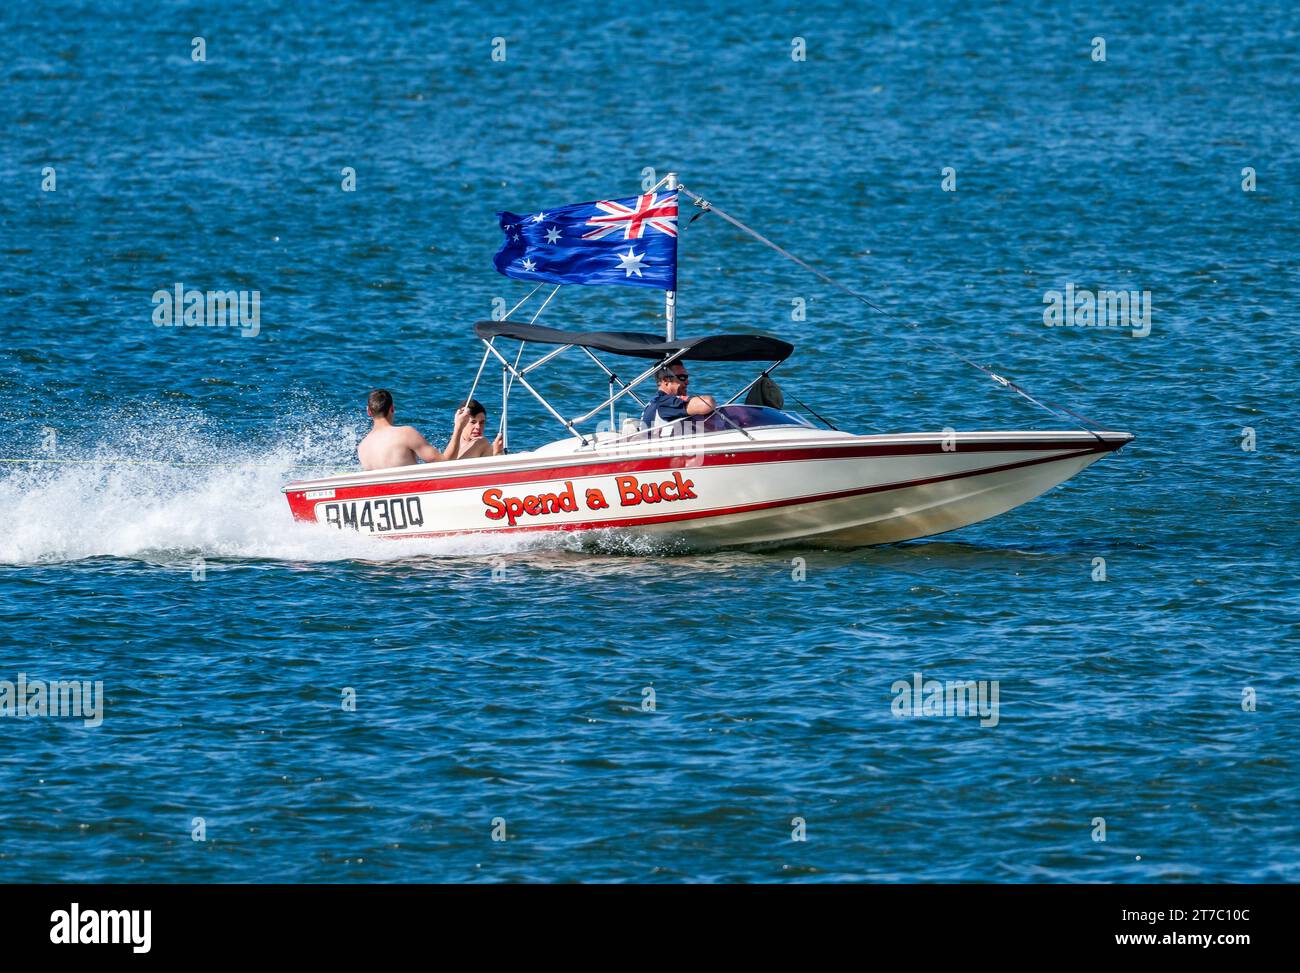 A speedboat with Australian flag running full speed in a lake. Queensland, Australia. Stock Photo